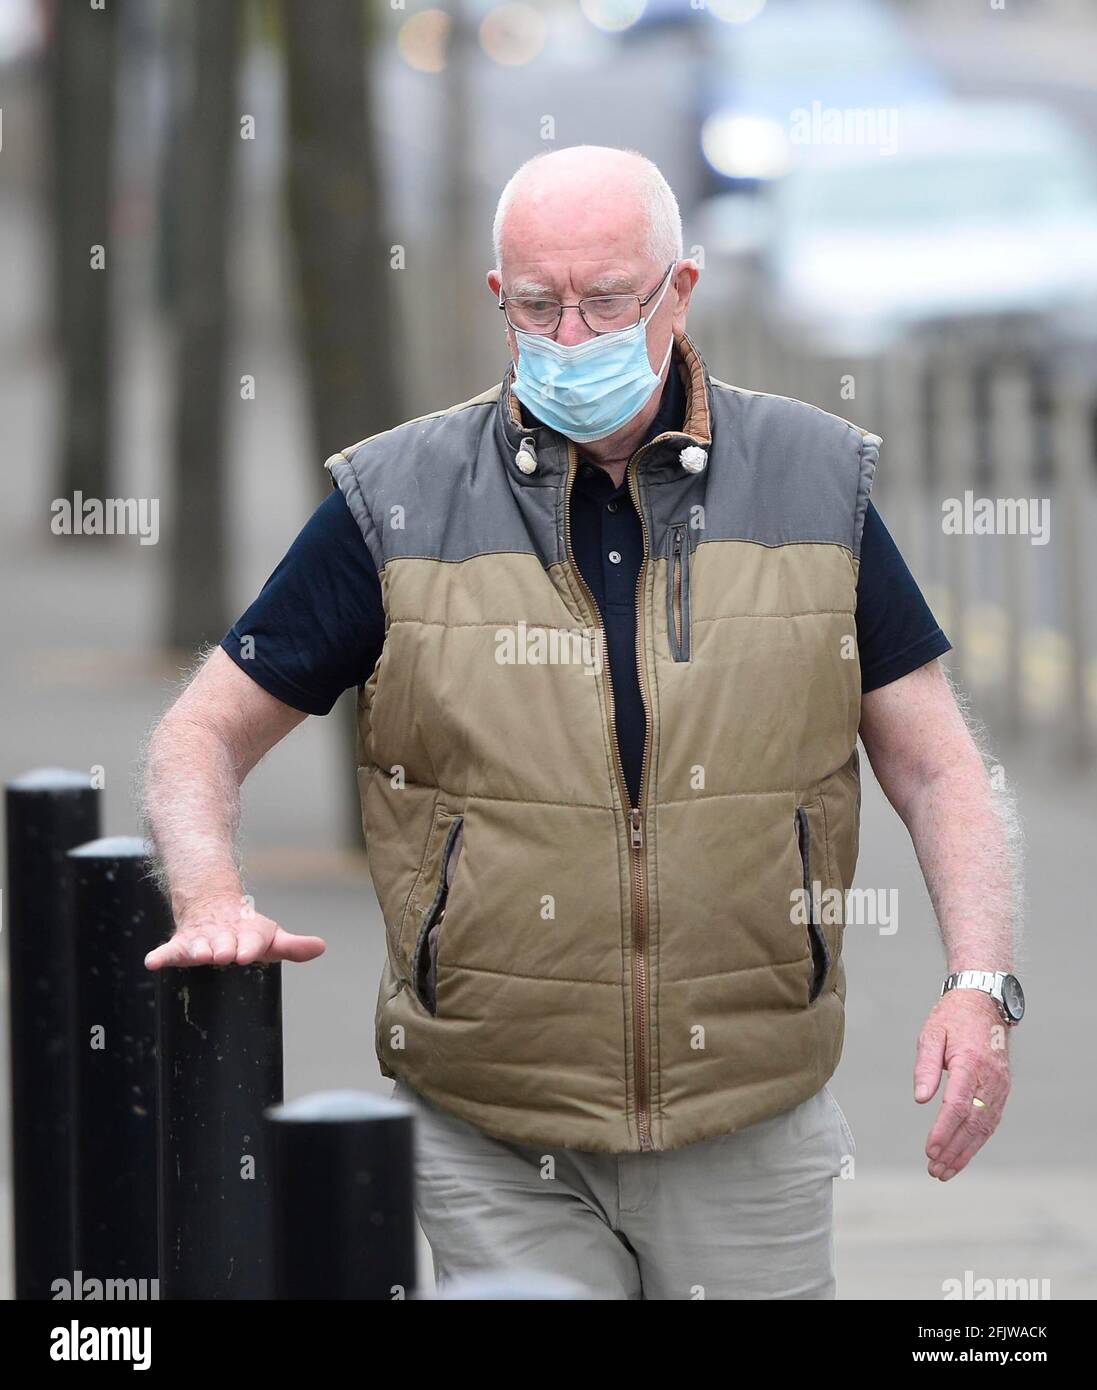 Witness Sean Bannon leaves Belfast Crown Court after giving evidence in the trial of two former paratroopers who deny murdering Joe McCann in Northern Ireland almost 50 years ago. Official IRA member McCann, 24, died after being shot in the Markets area of Belfast in 1972. The veterans, referred to in court proceedings as Soldiers A and C, entered not guilty pleas. Picture date: Monday April 26, 2021. Stock Photo